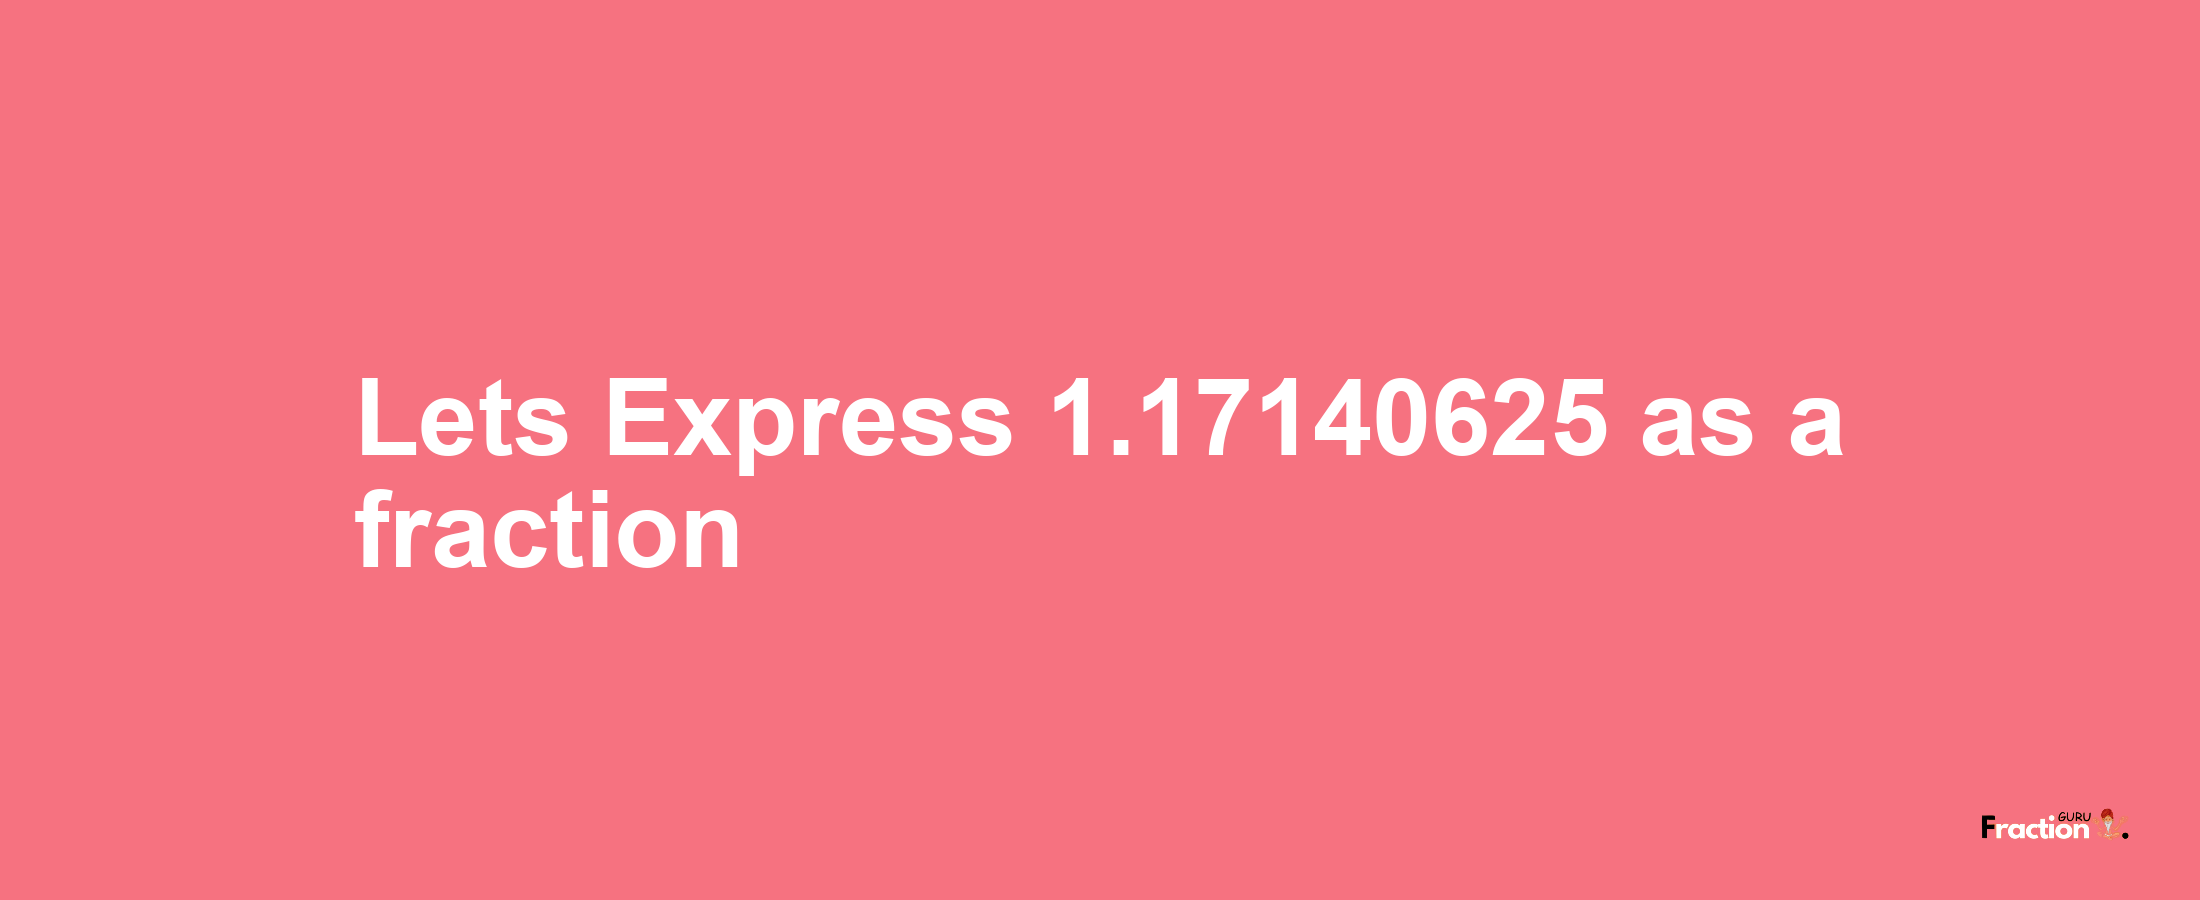 Lets Express 1.17140625 as afraction